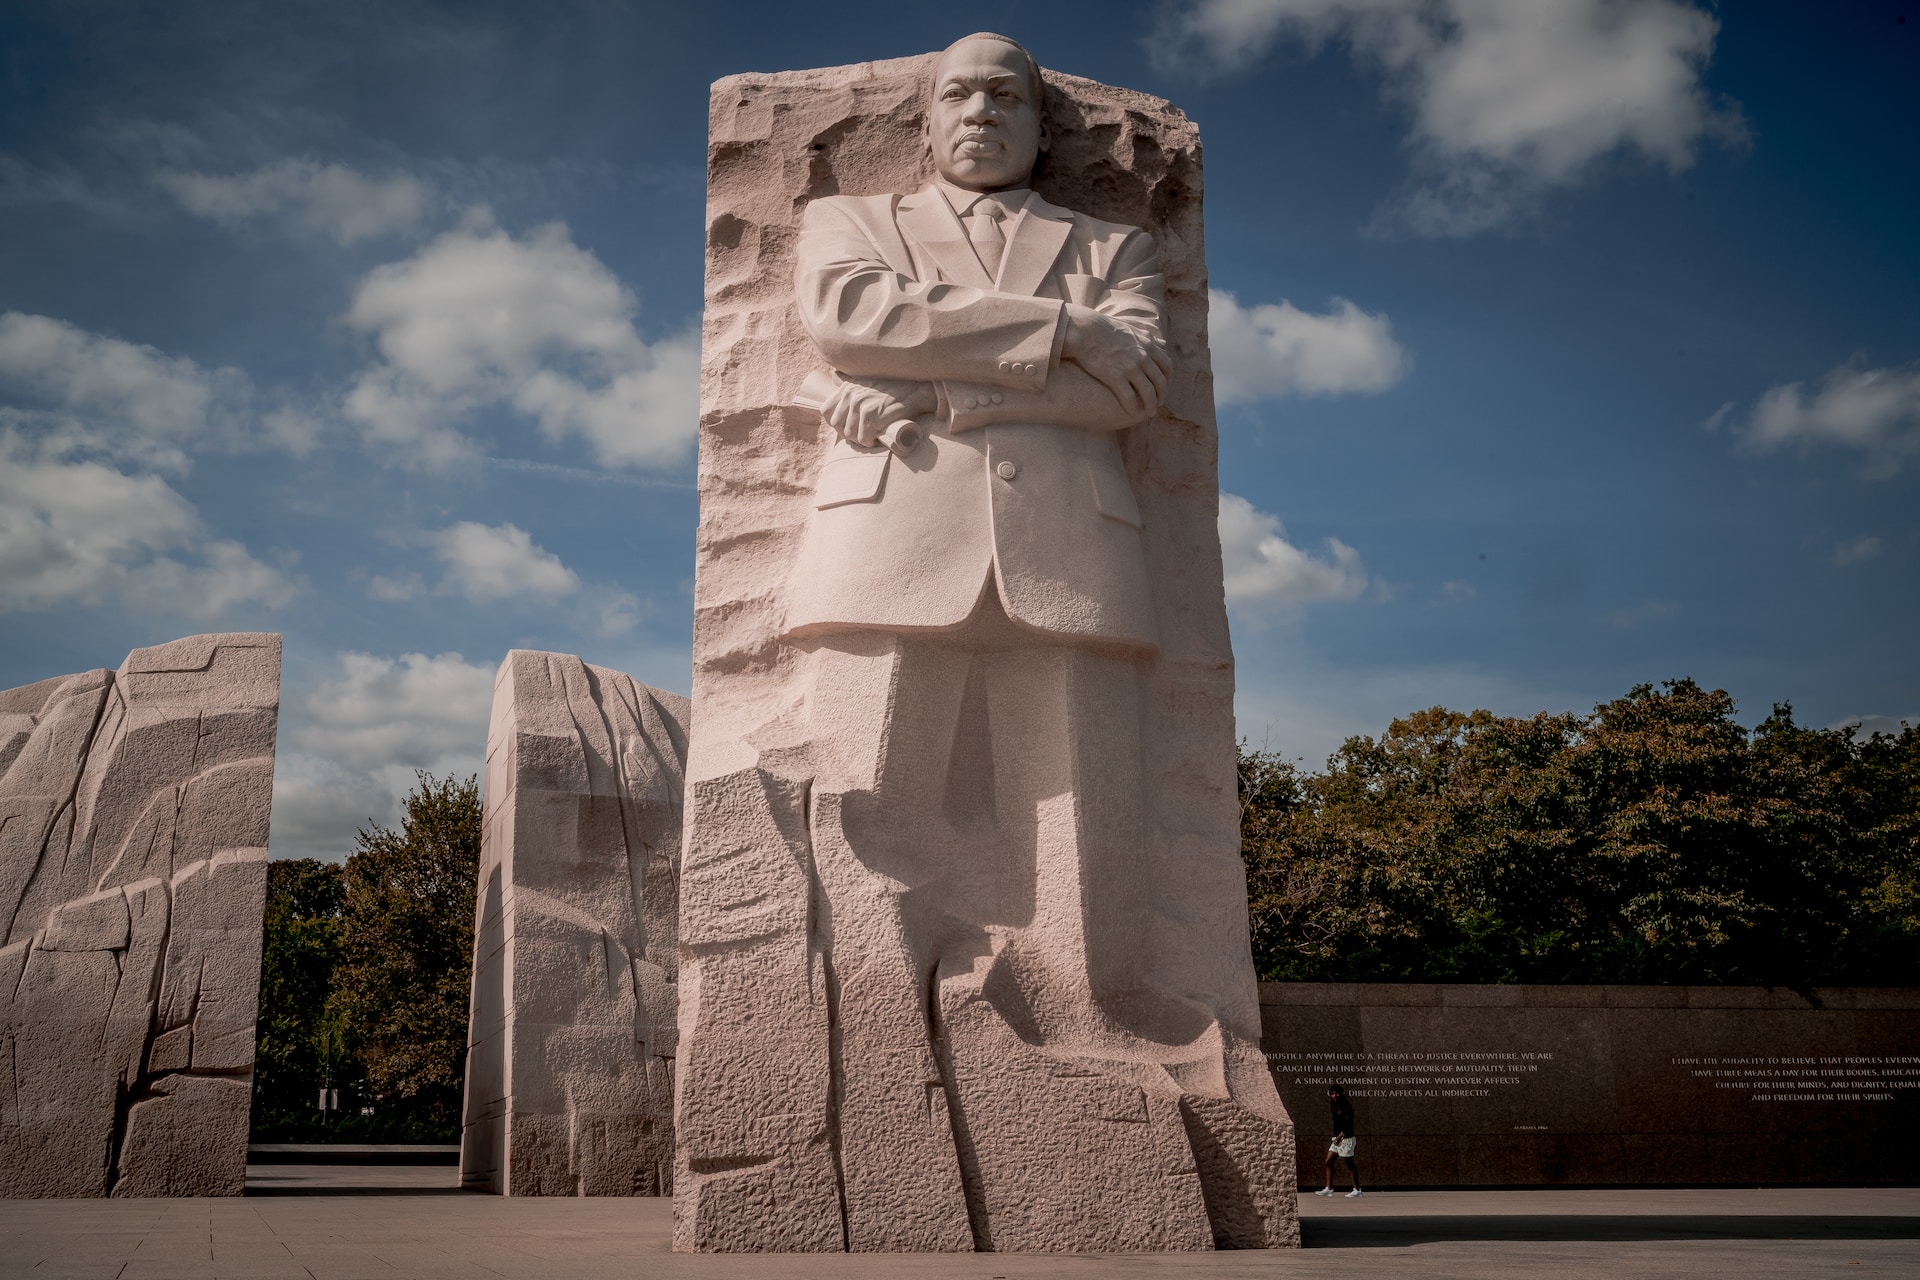 Statue of Martin Luther King Jr. in Washington, D.C.